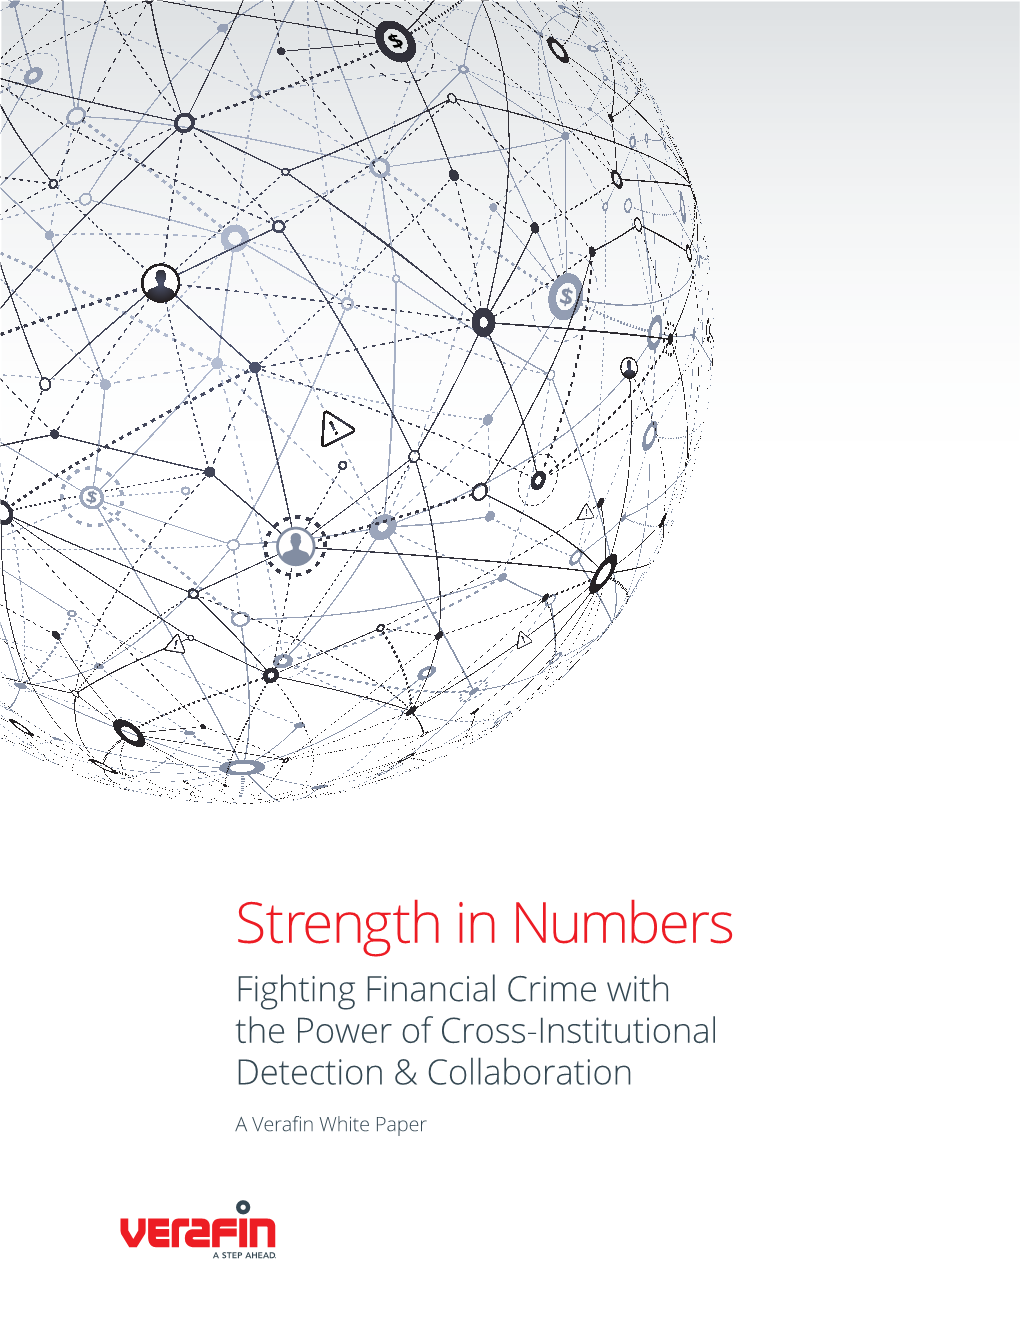 Strength in Numbers Fighting Financial Crime with the Power of Cross-Institutional Detection & Collaboration